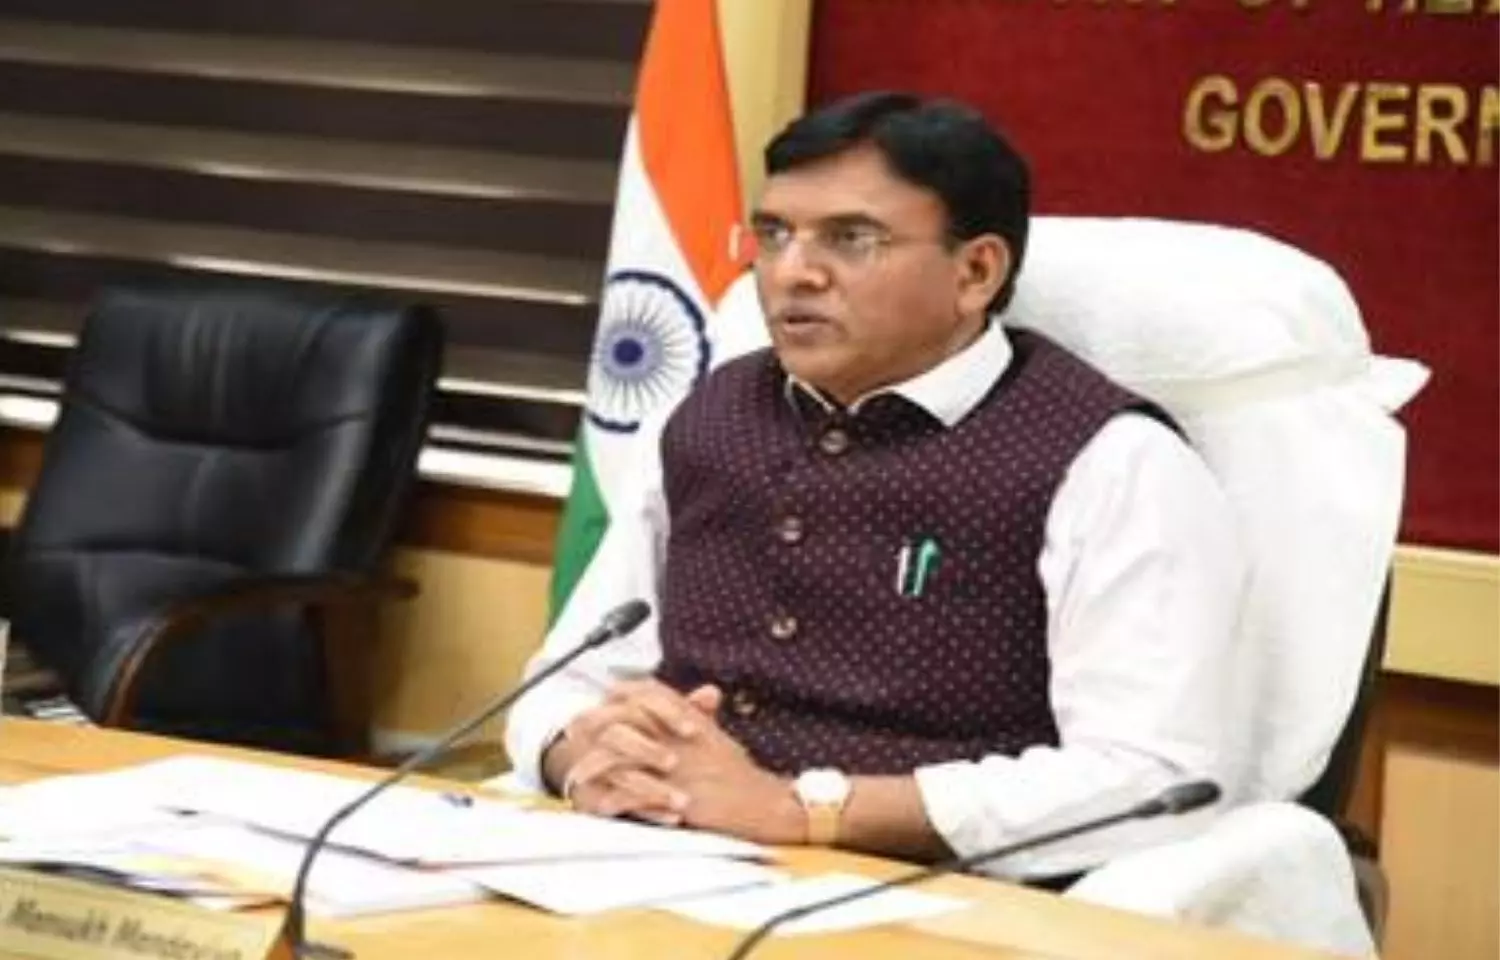 Union Health Minister discusses roadmap for Indian pharma sector